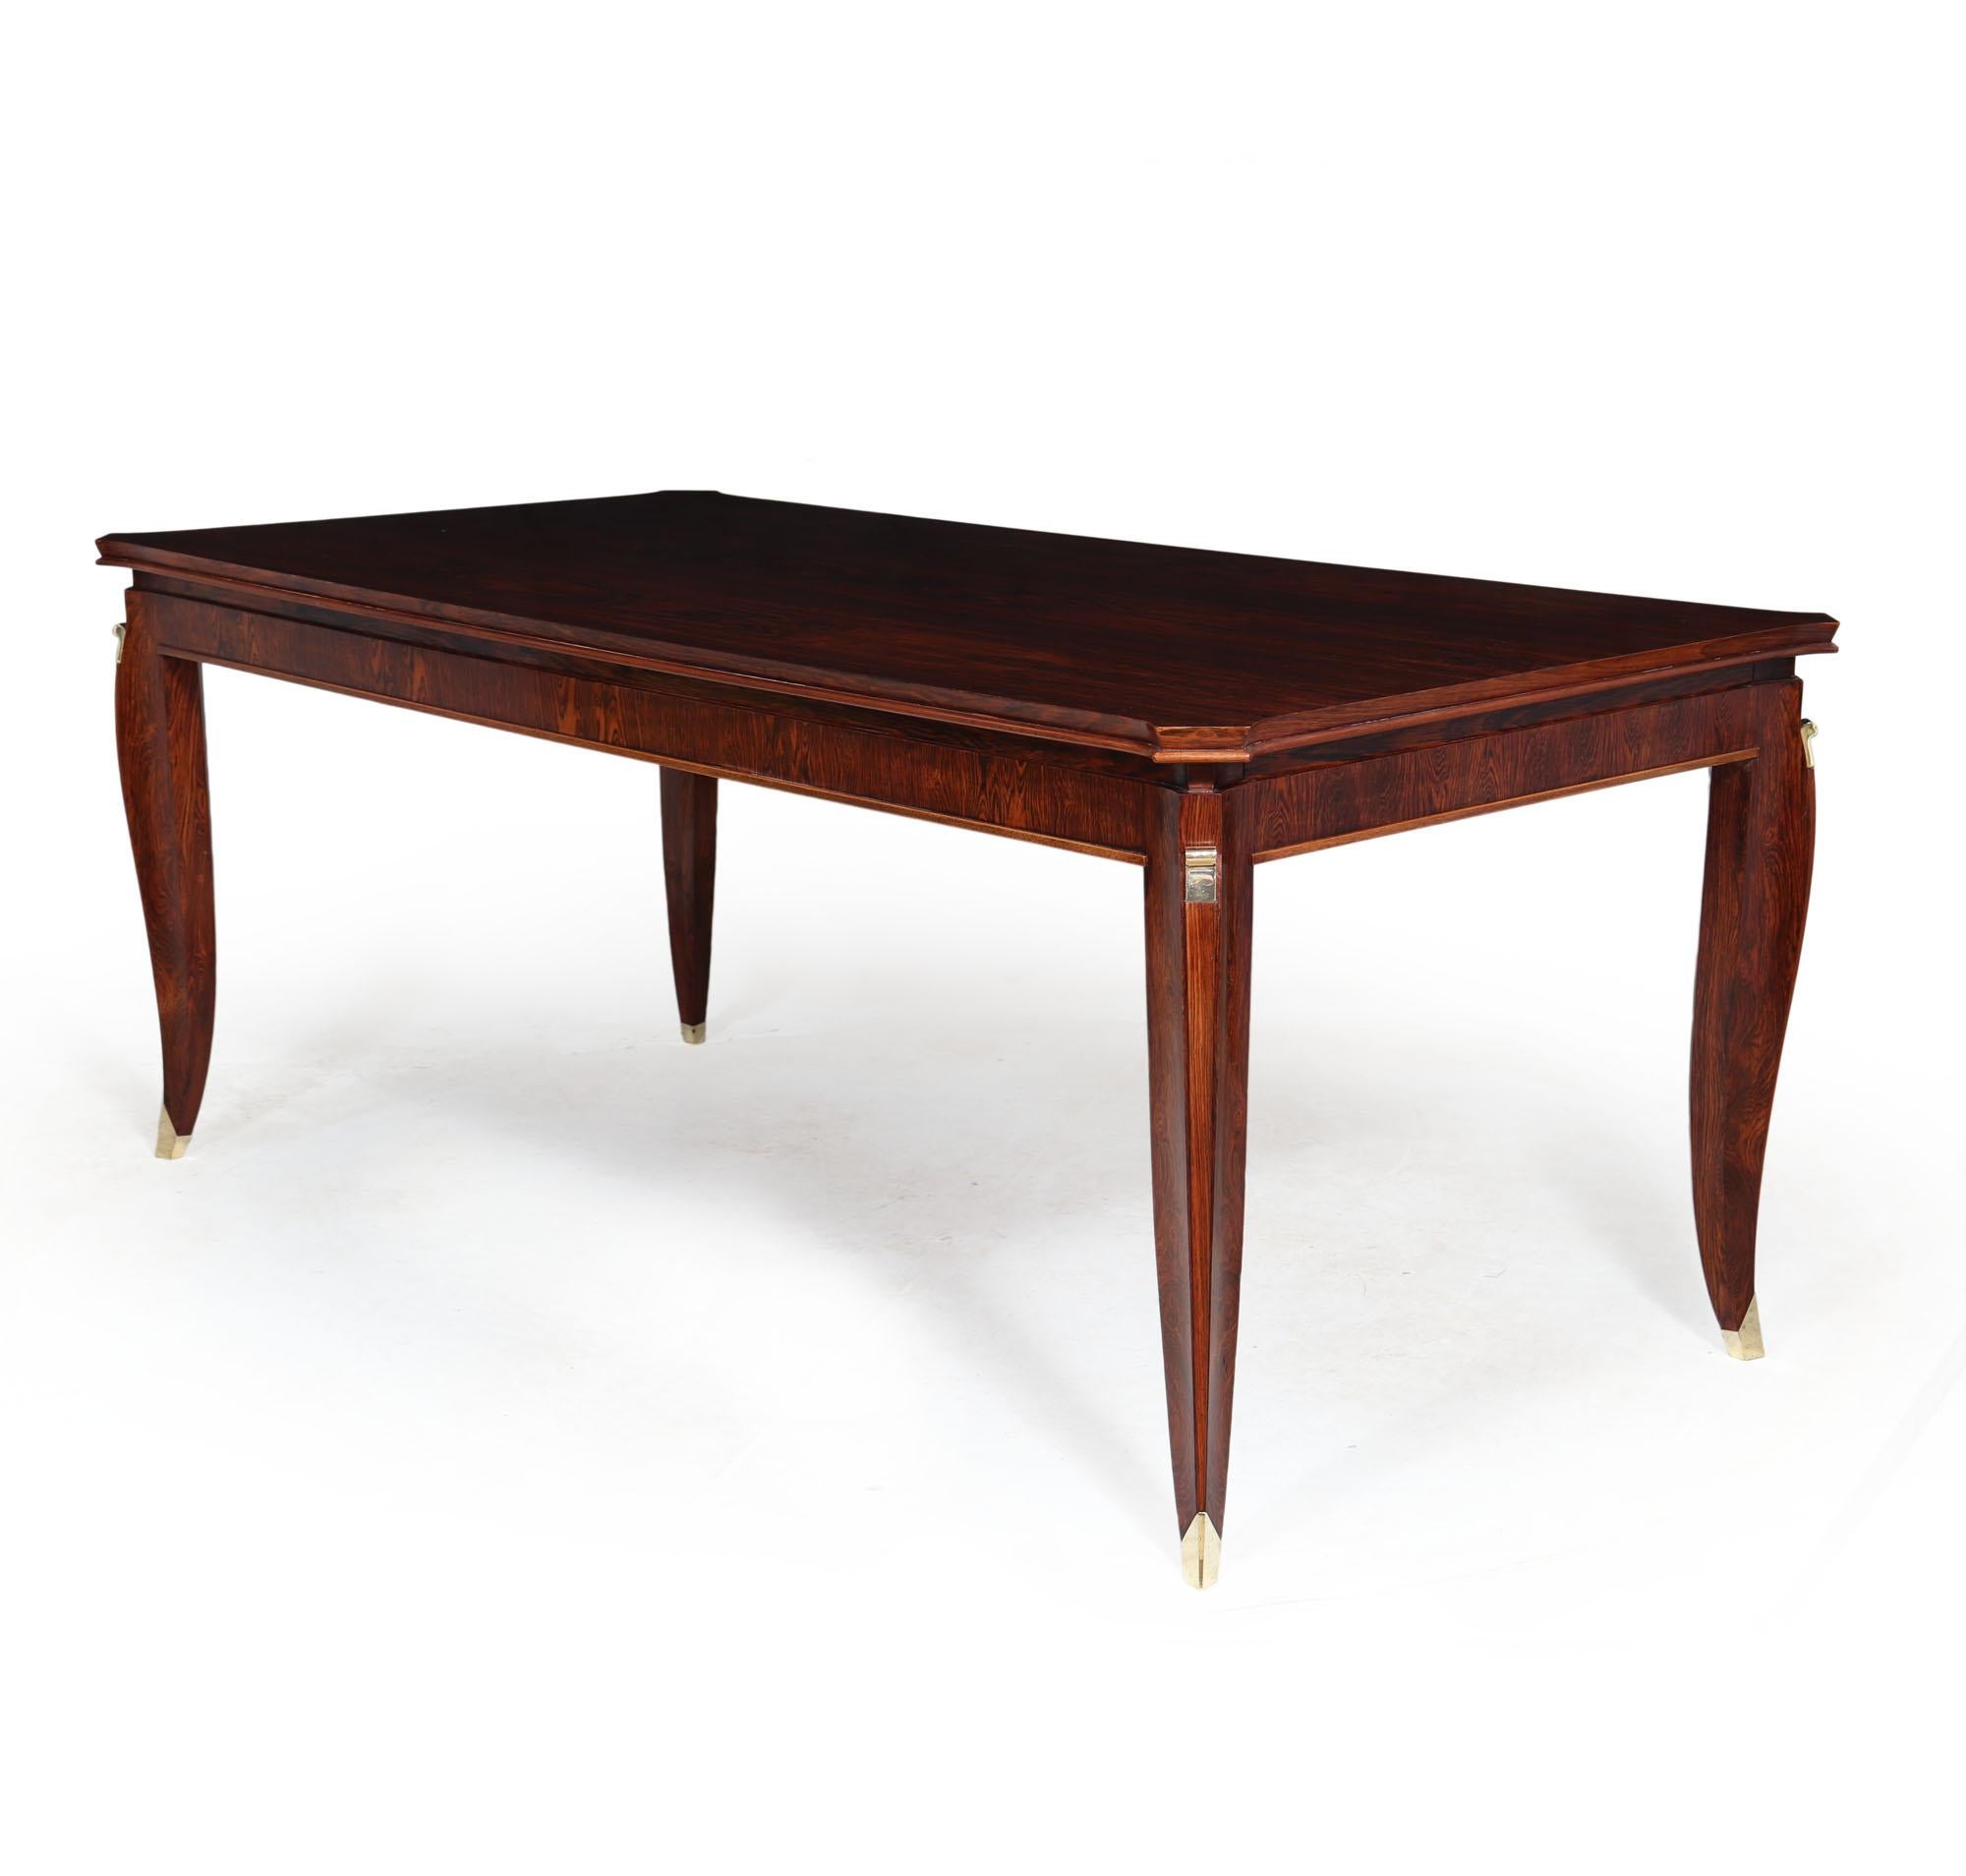 Exceptional quality French Art Deco dining table by Maurice Rinck, produced in solid oak with rosewood veneer and bronze sabots and fittings. The table will seat 8 without the leaves and 10-12 with. The table has been professionally polished and is